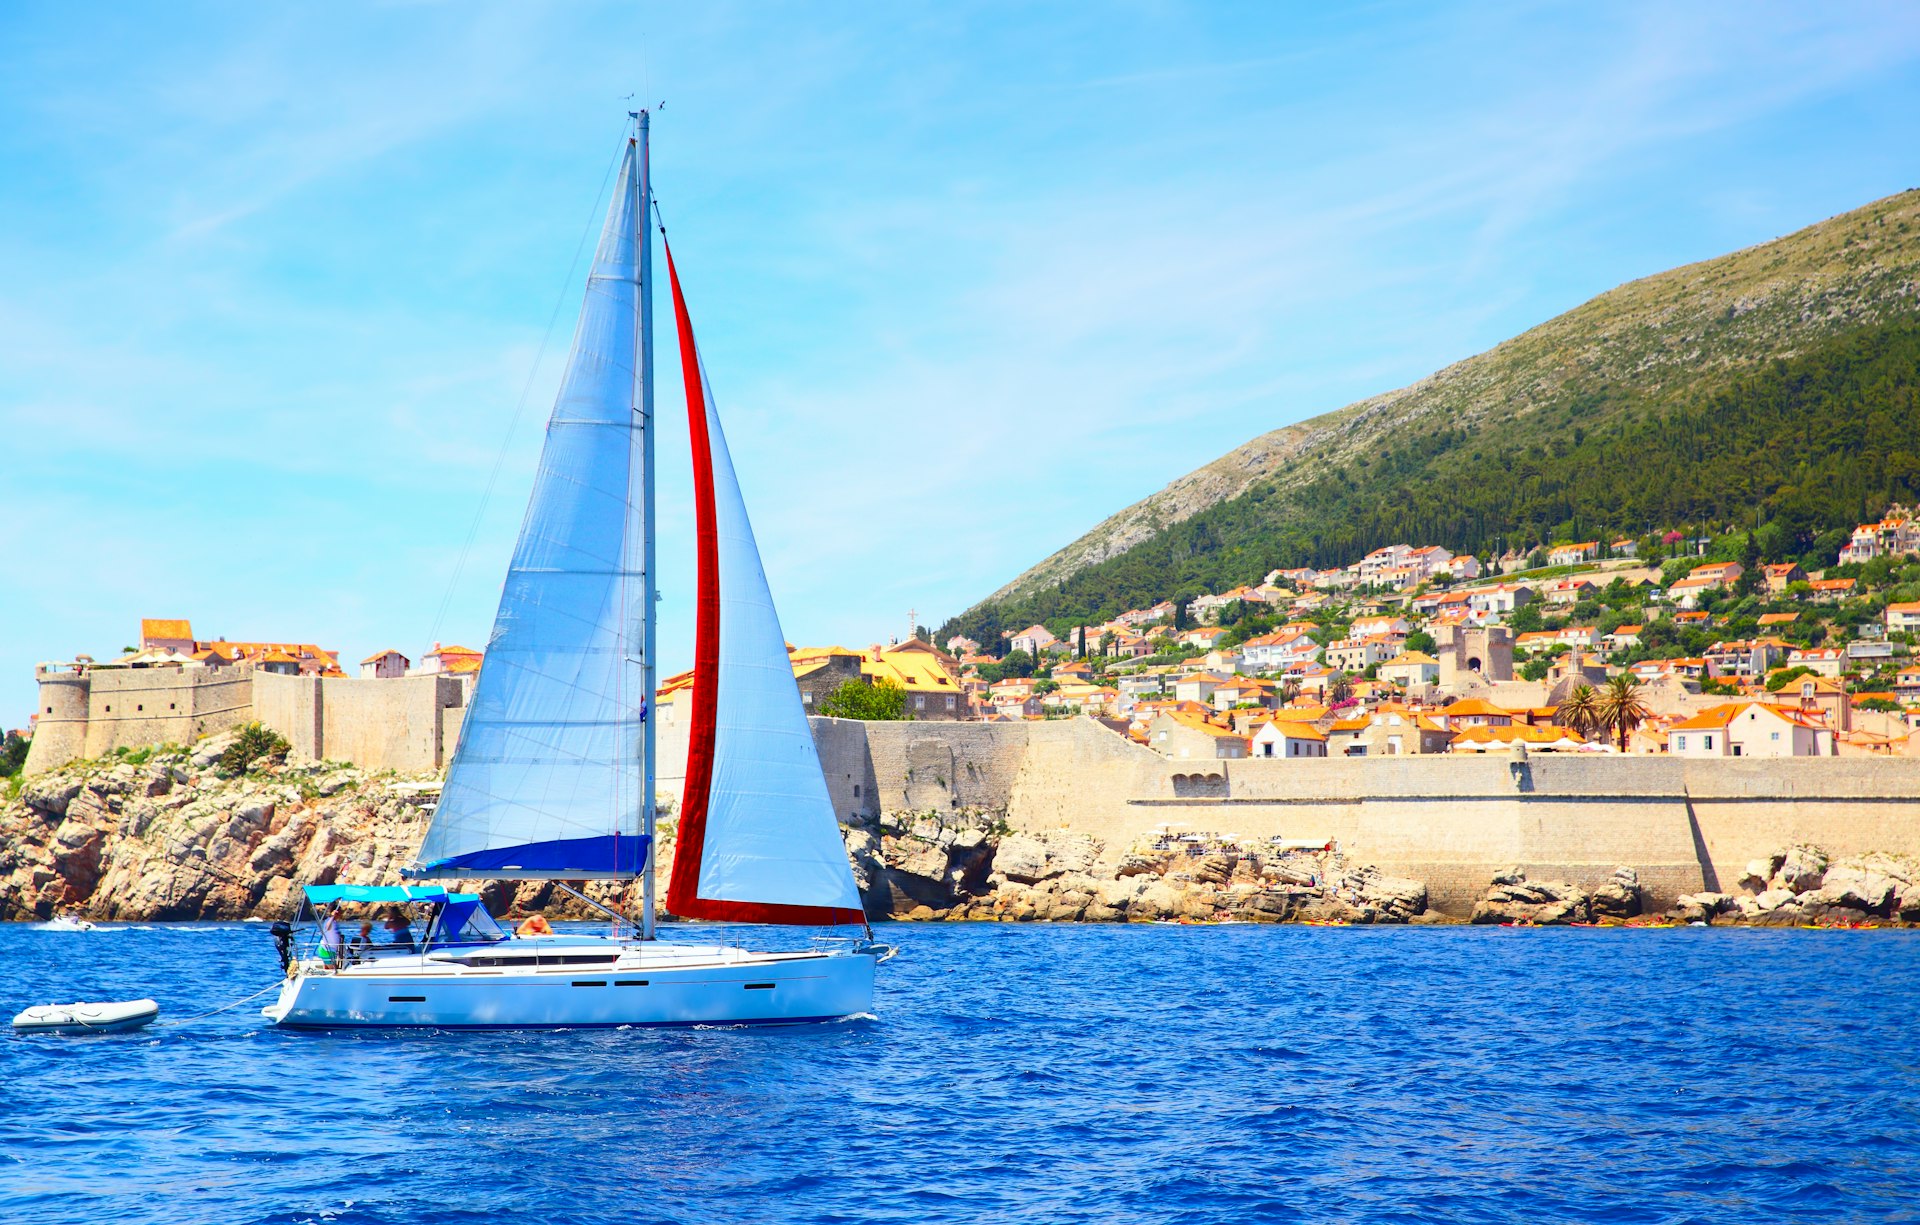 A sail boat sails past Dubrovnik. The small boat has white sails and is surrounded by clear blue ocean.